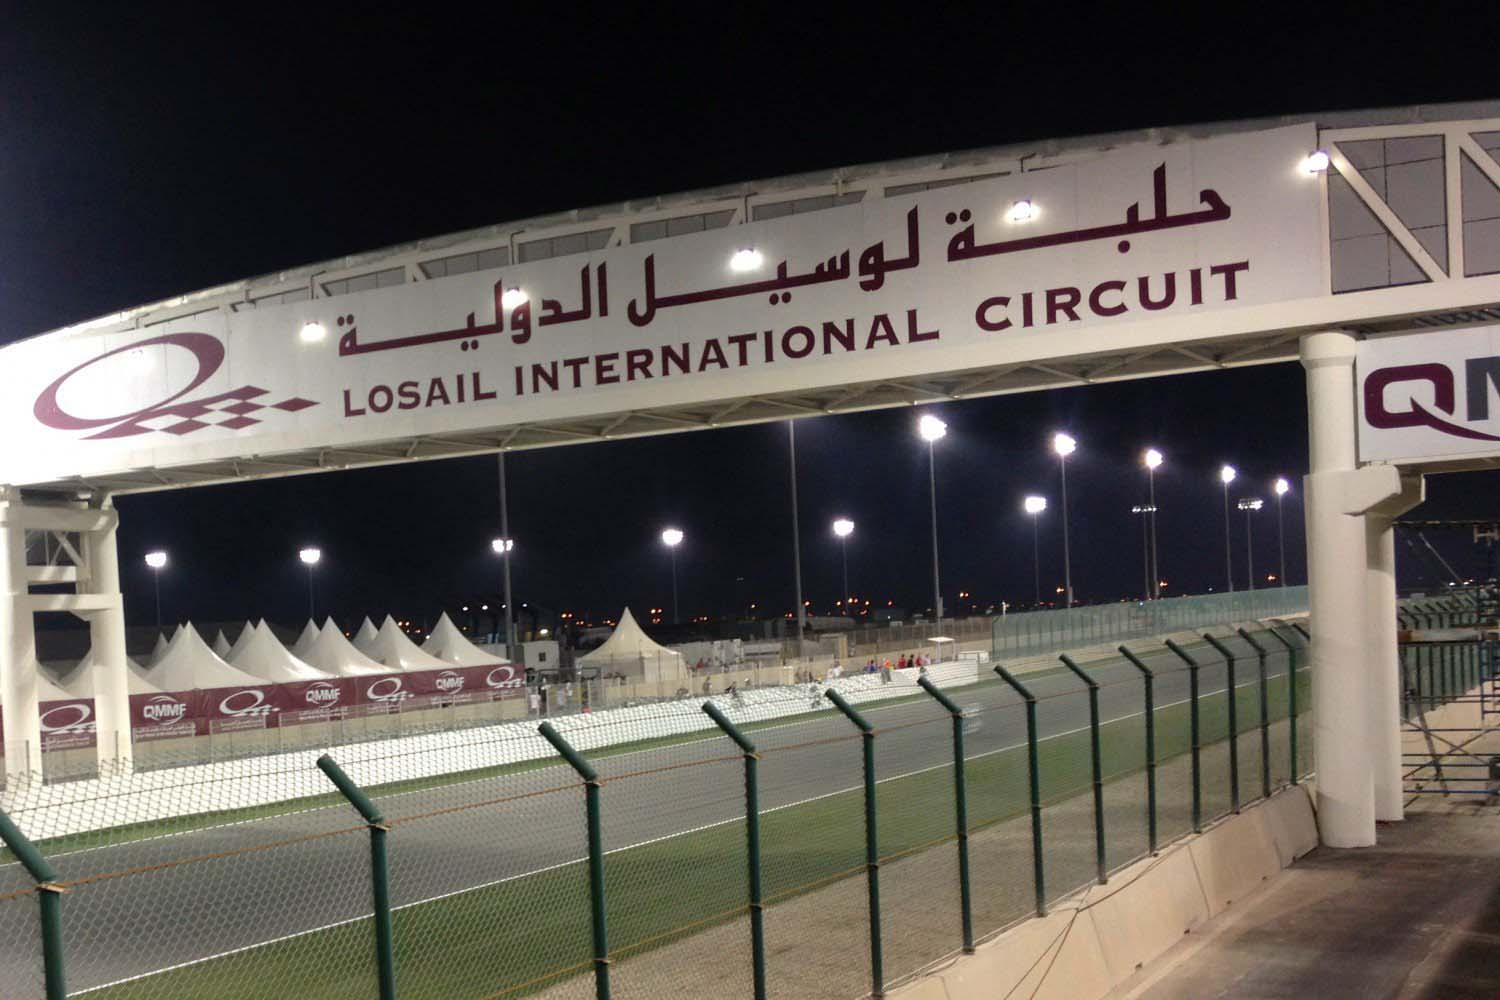 Smelling the burning rubber yet? F1 racers and fans gear up for Qatar GP